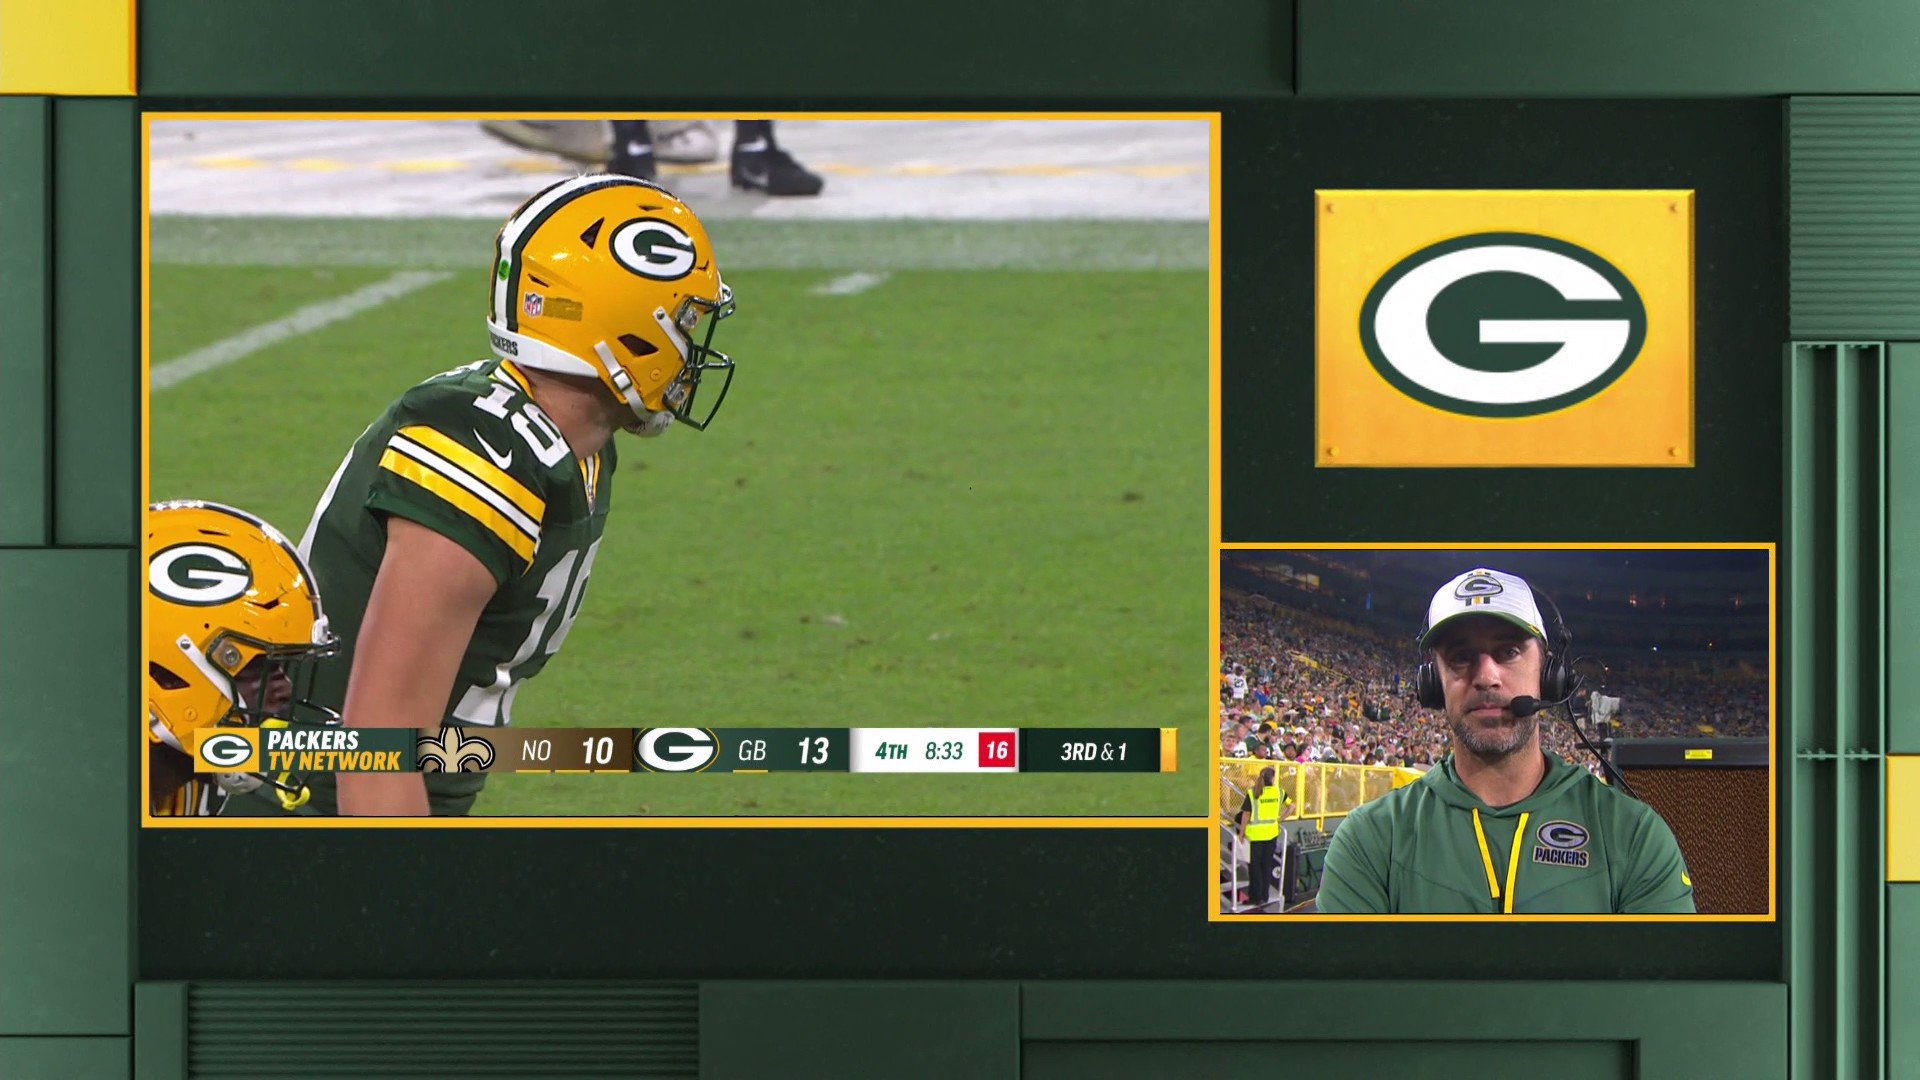 Green Bay Packers on X: '51-yard run to the HOUSE for Danny Etling &  @AaronRodgers12 is loving it! TOUCHDOWN! 